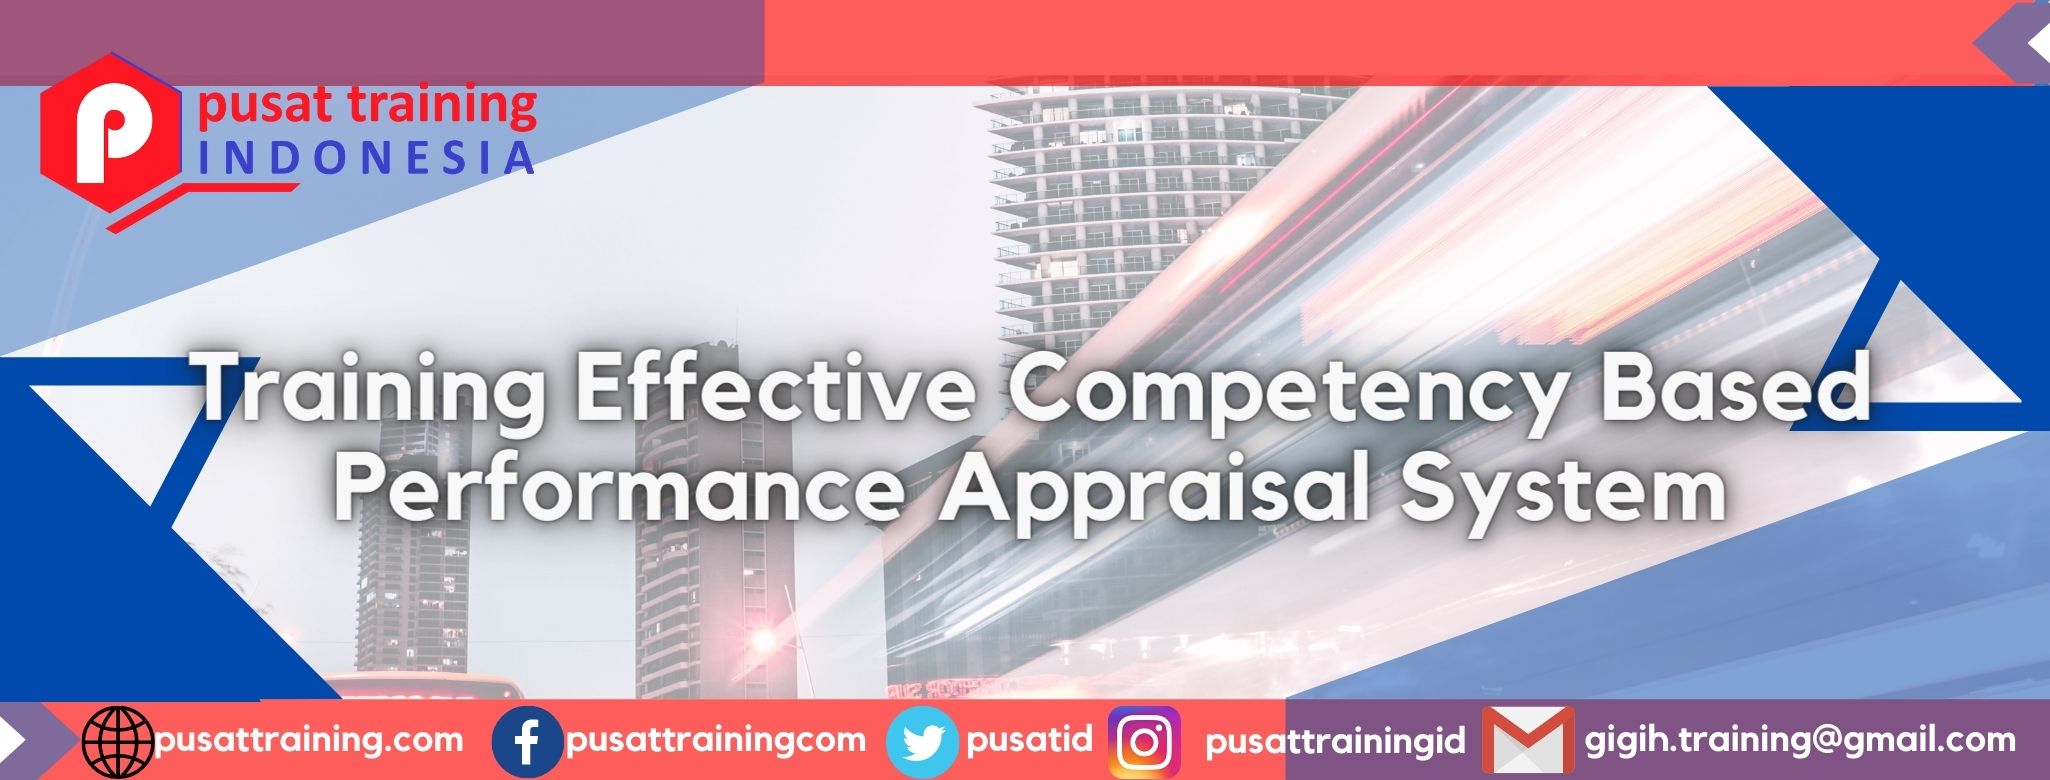 Training Effective Competency Based Performance Appraisal System